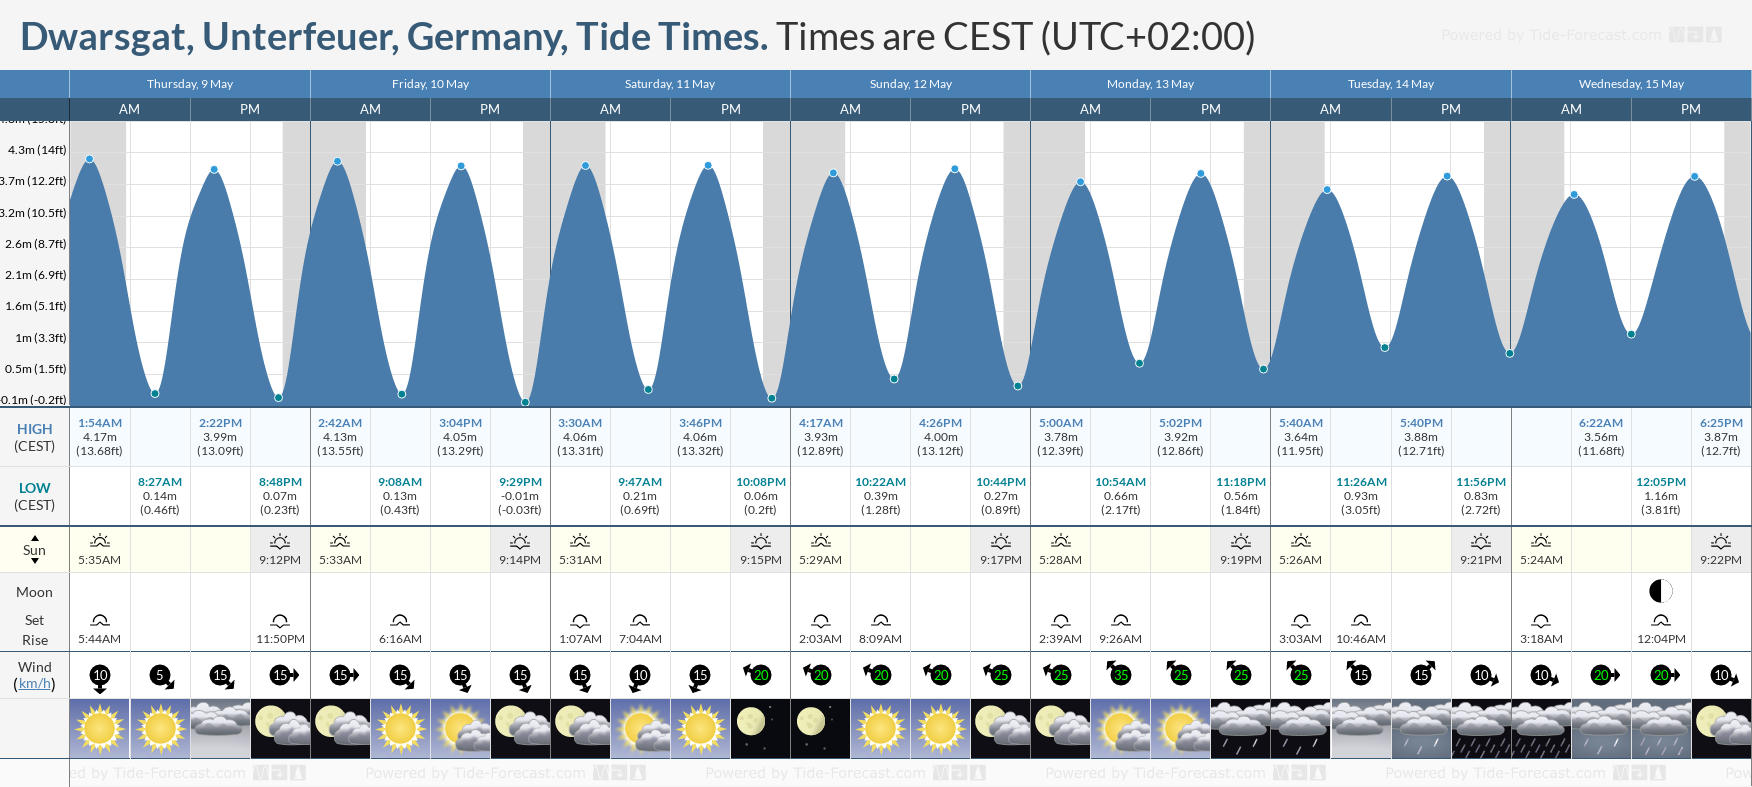 Dwarsgat, Unterfeuer, Germany Tide Chart including high and low tide tide times for the next 7 days